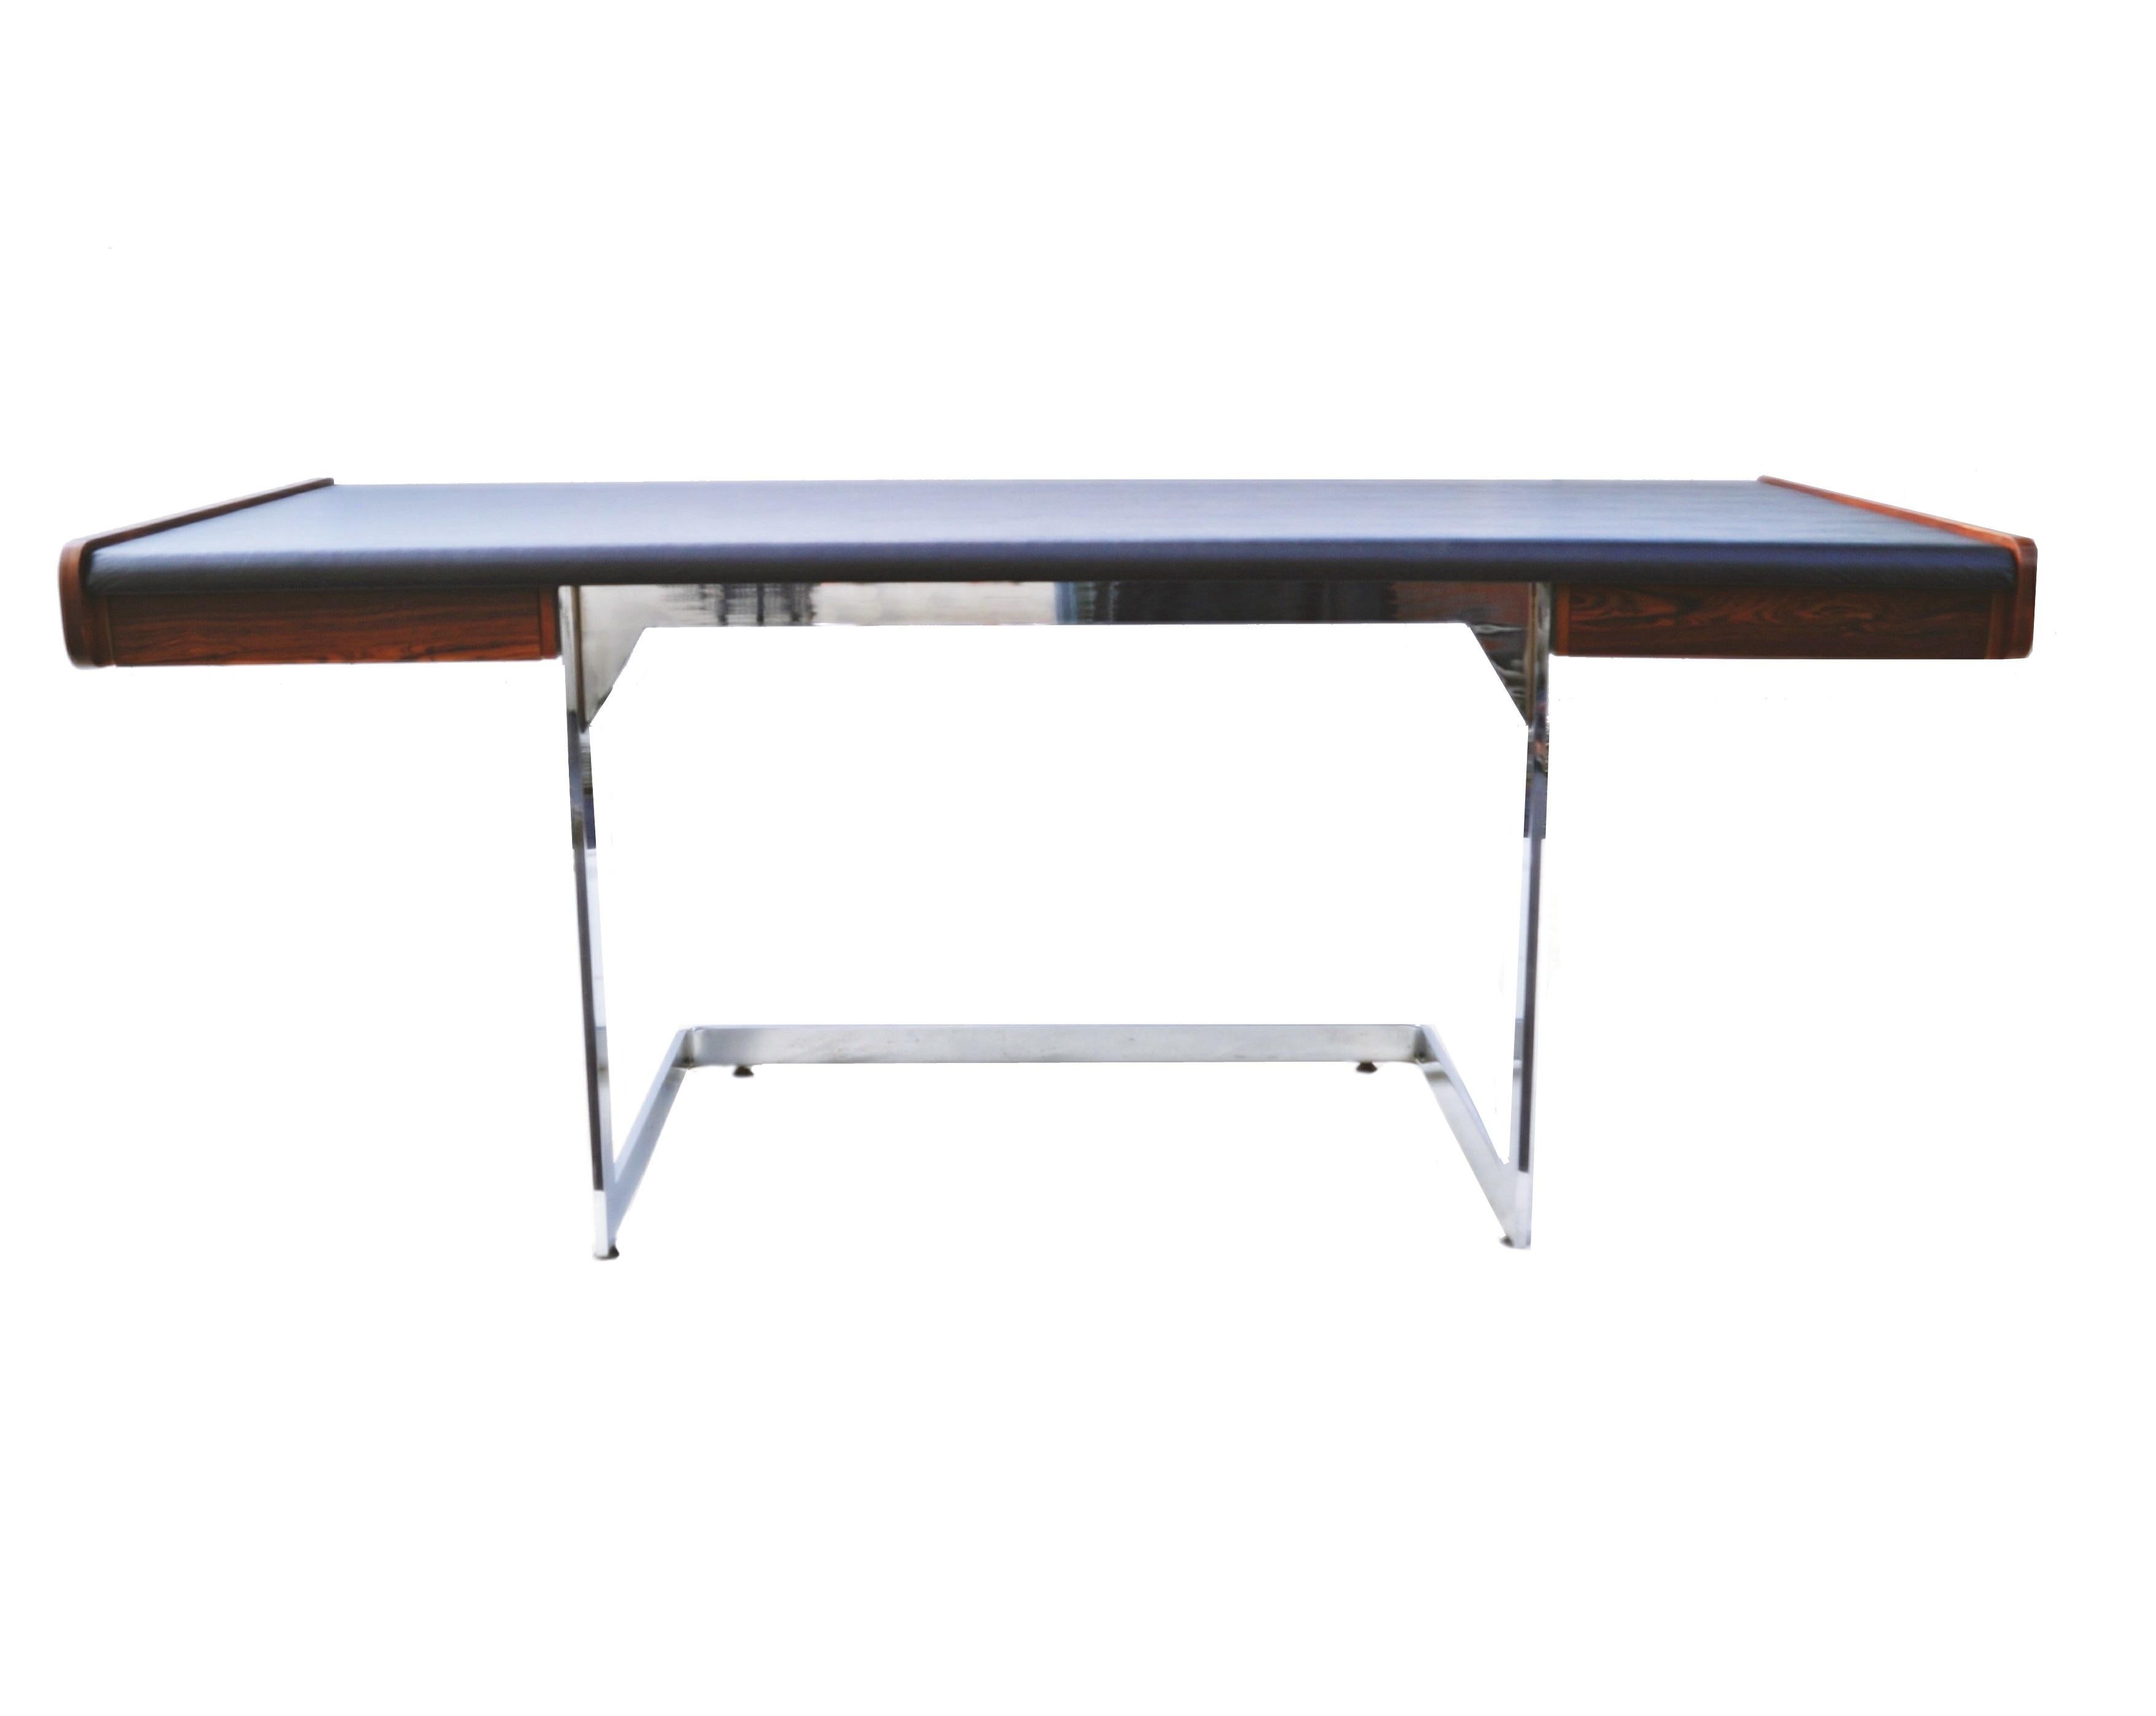 Mid-20th Century Mid-Century Modern Rosewood and Chrome Desk by Ste. Marie & Laurent